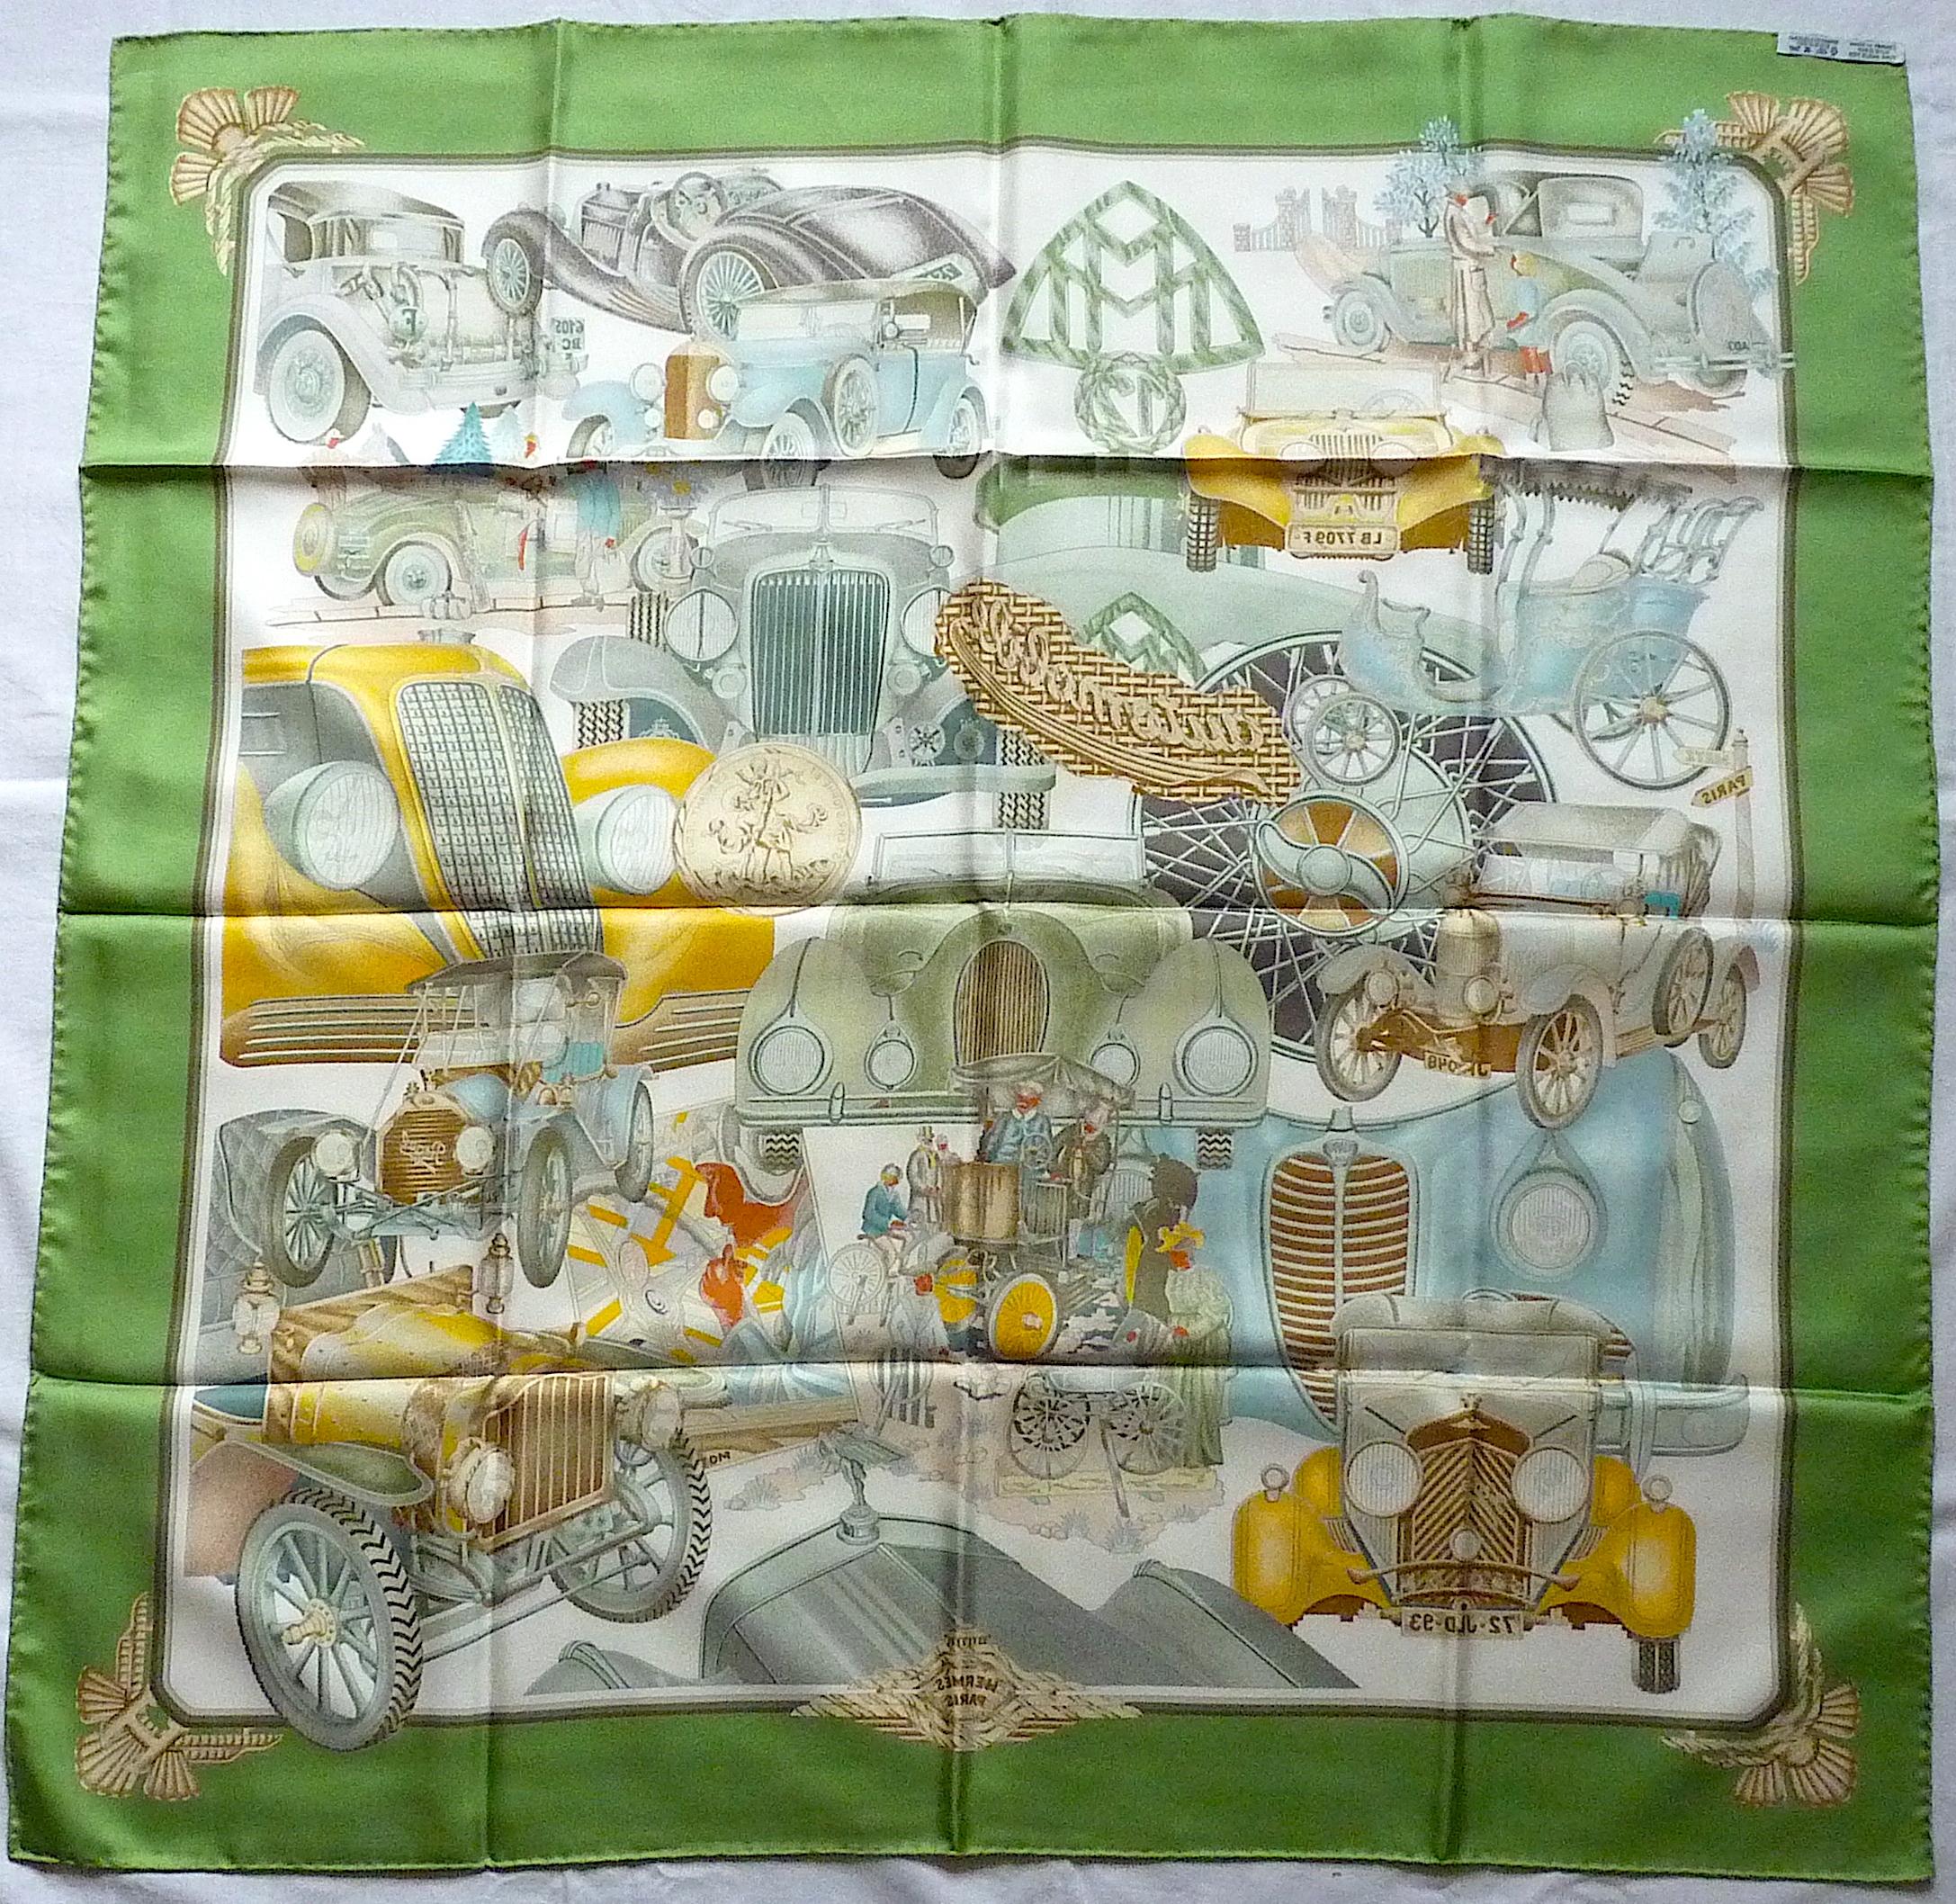 HERMES Scarf Automobile By Joachim Metz in Original Box, Issued in 1995 7